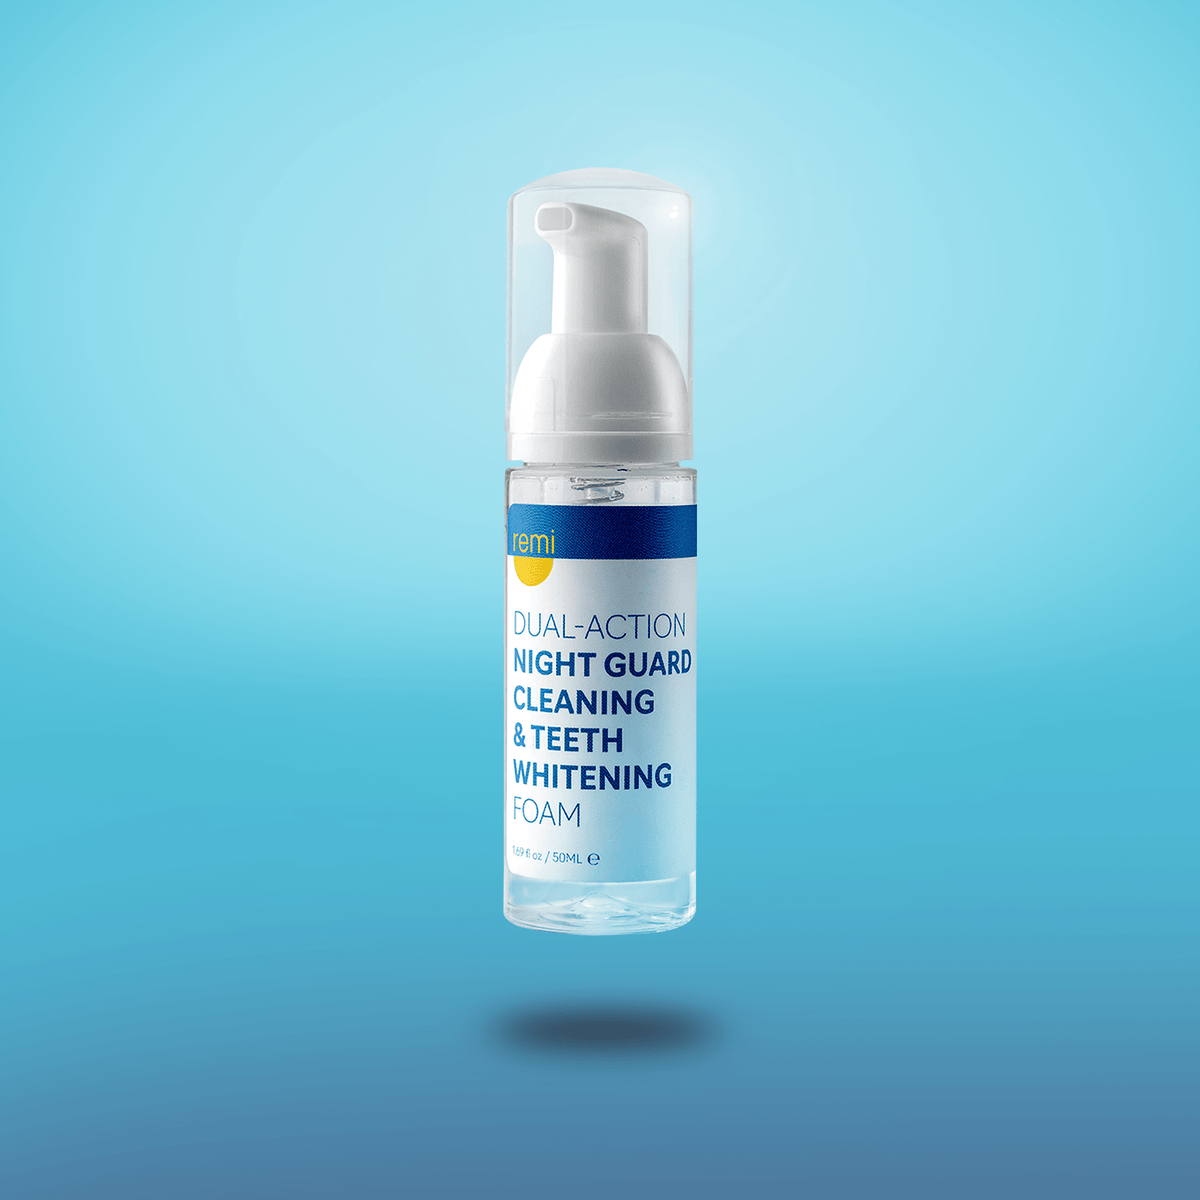 A bottle of Night Guard Cleaning + Teeth Whitening Foam on a blue background.